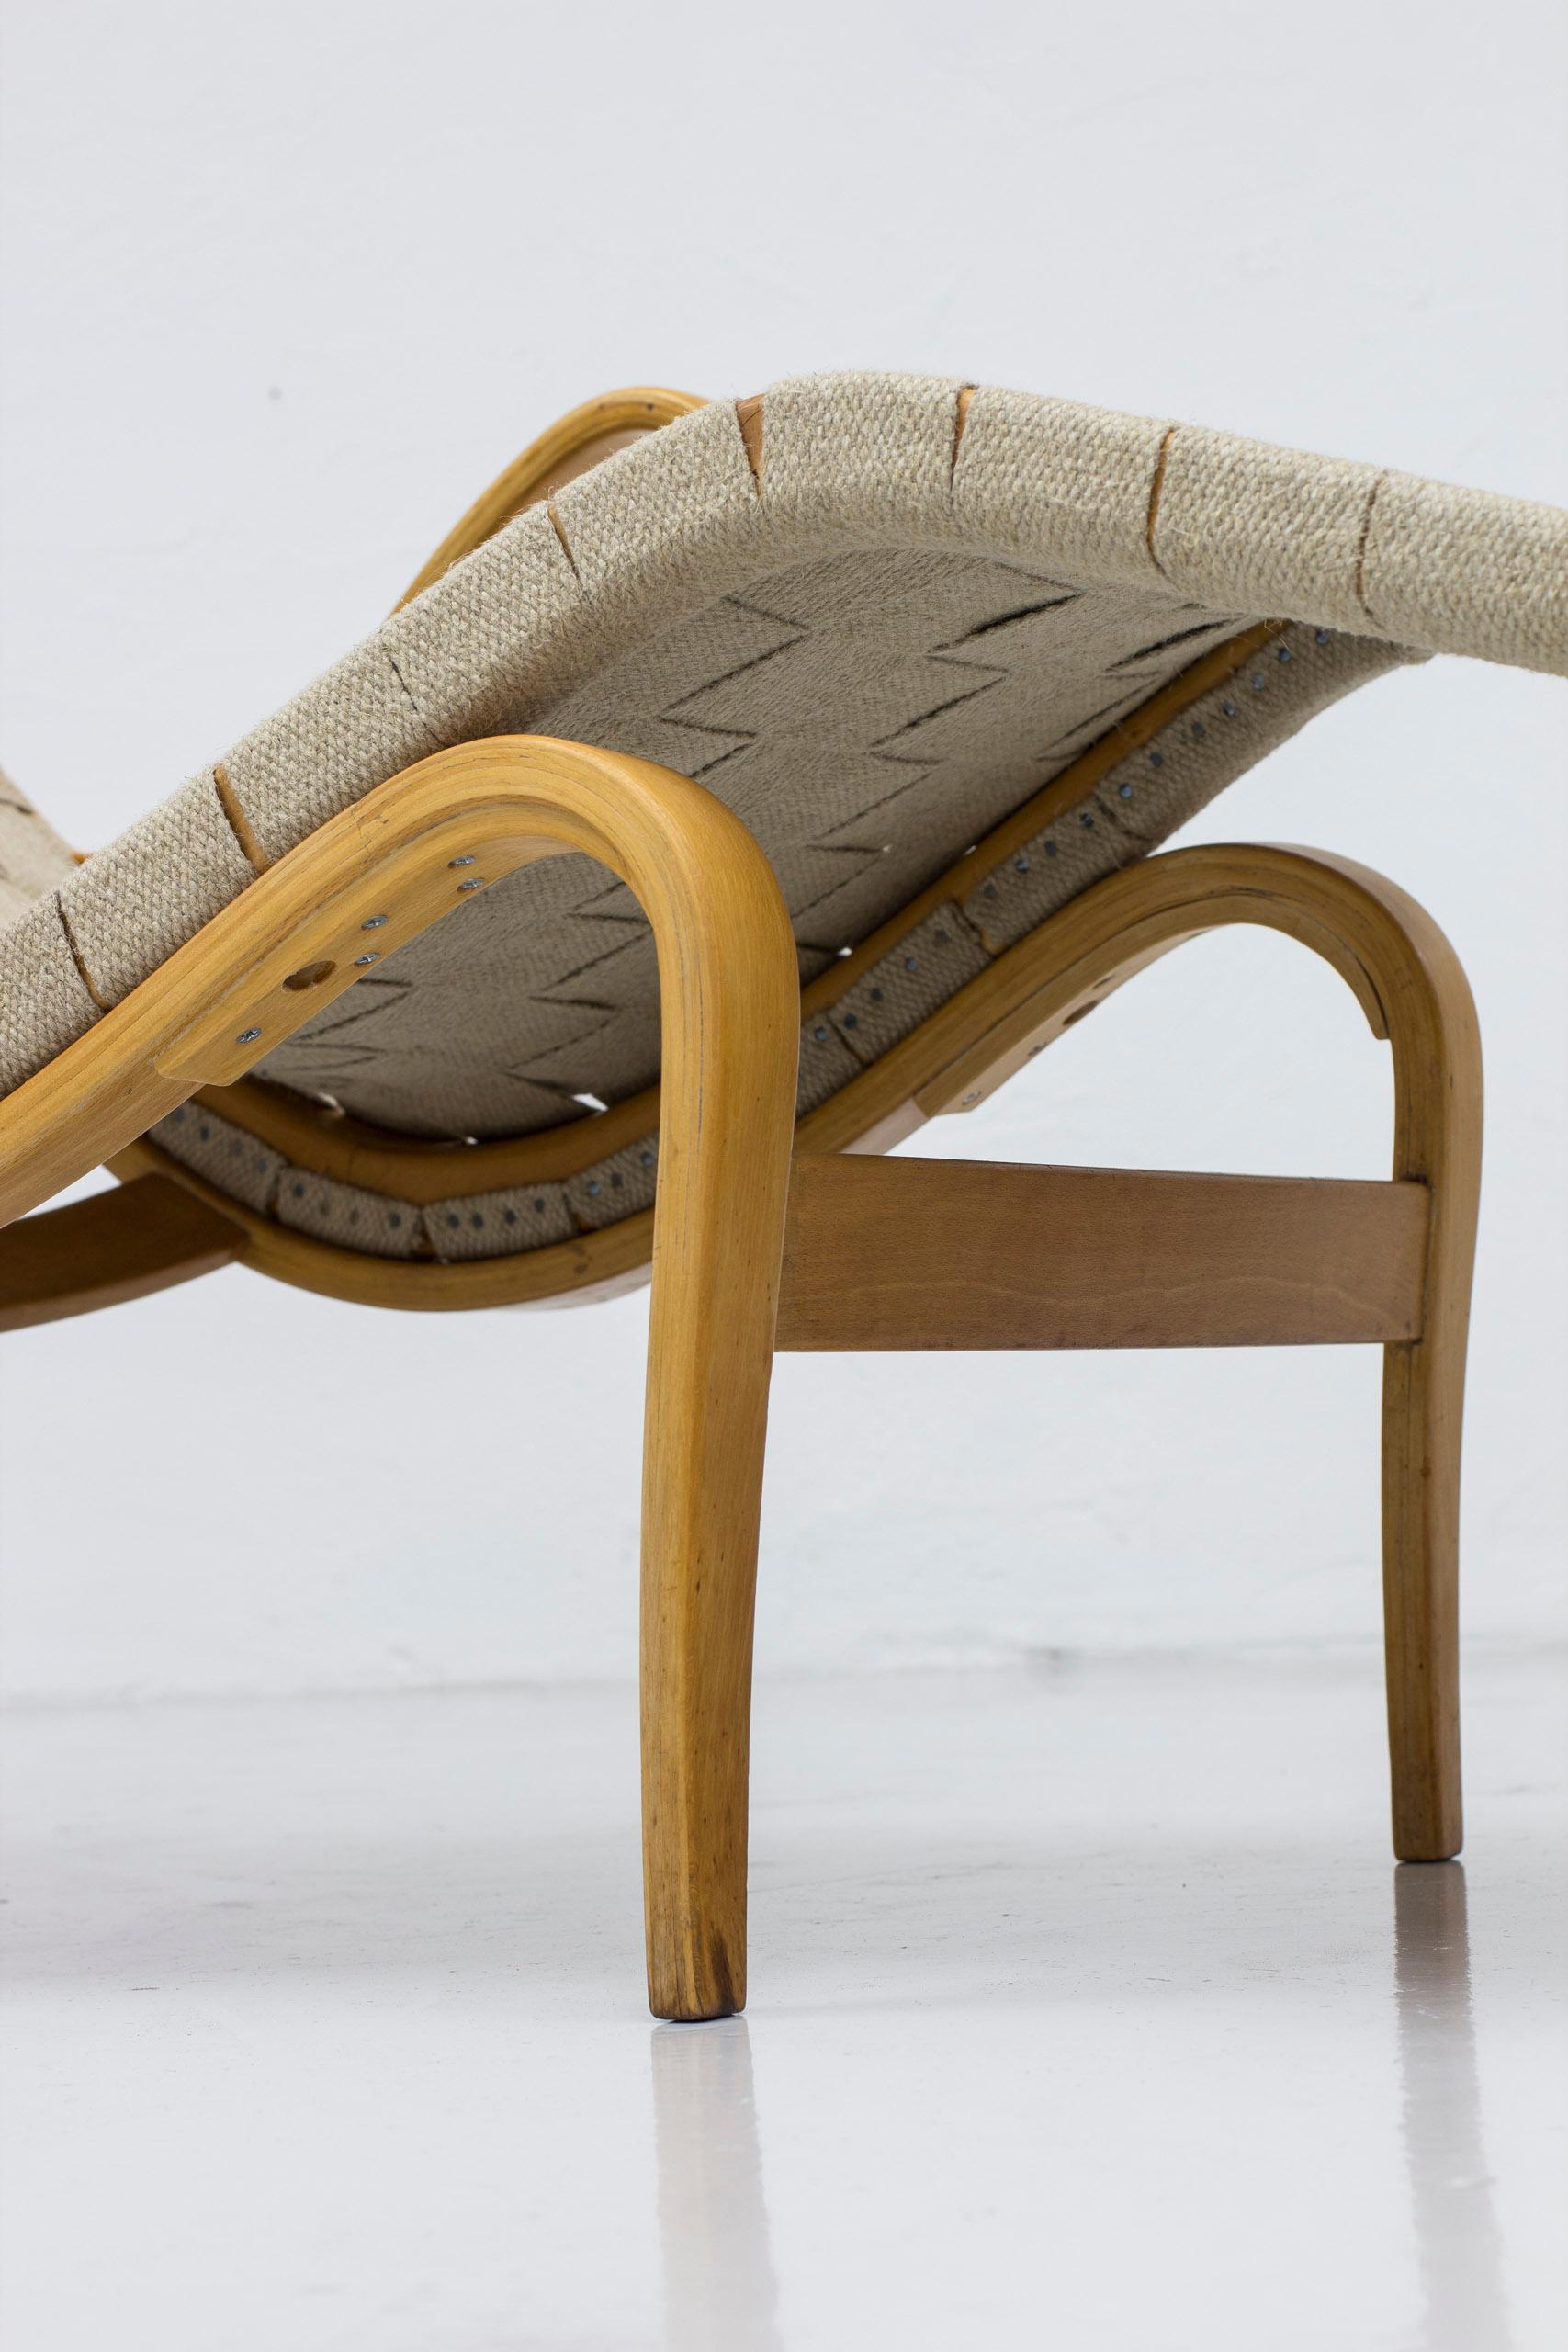 Model 36 chaise longues by Bruno Mathsson for Firma Karl Mathsson 1940s Sweden For Sale 7